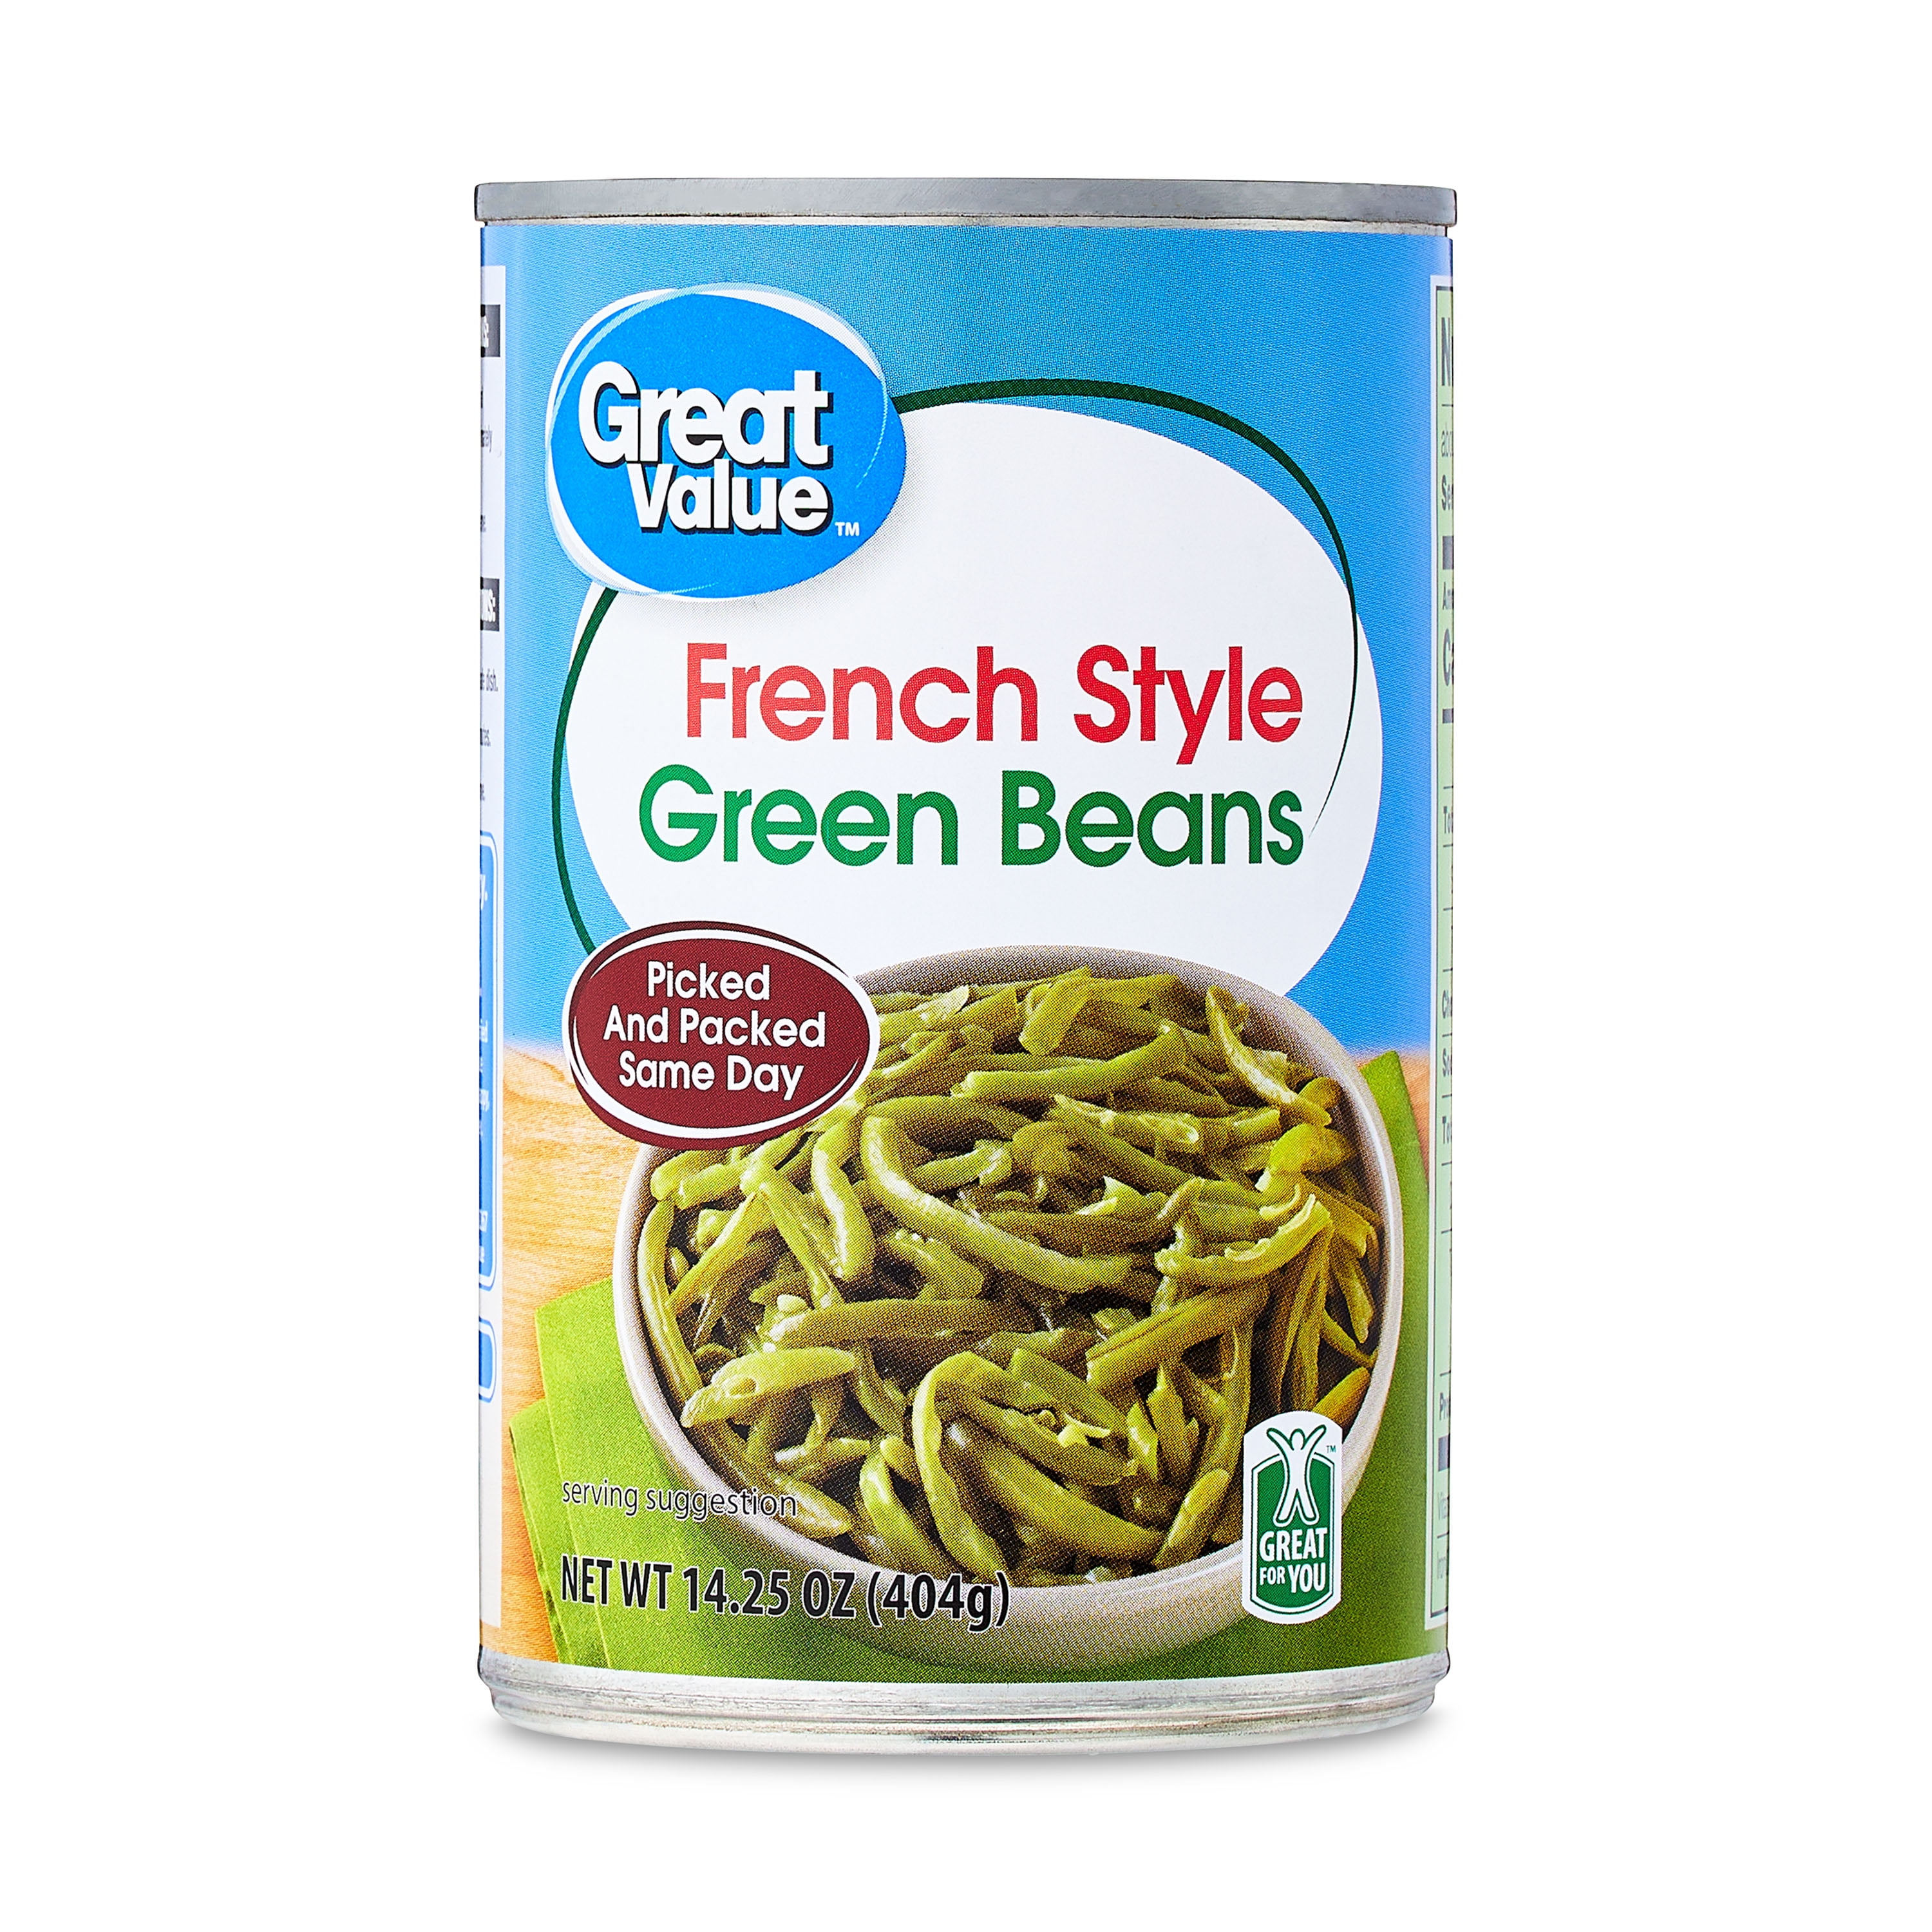 Great Value Canned French Style Green Beans, 14.5 oz Can